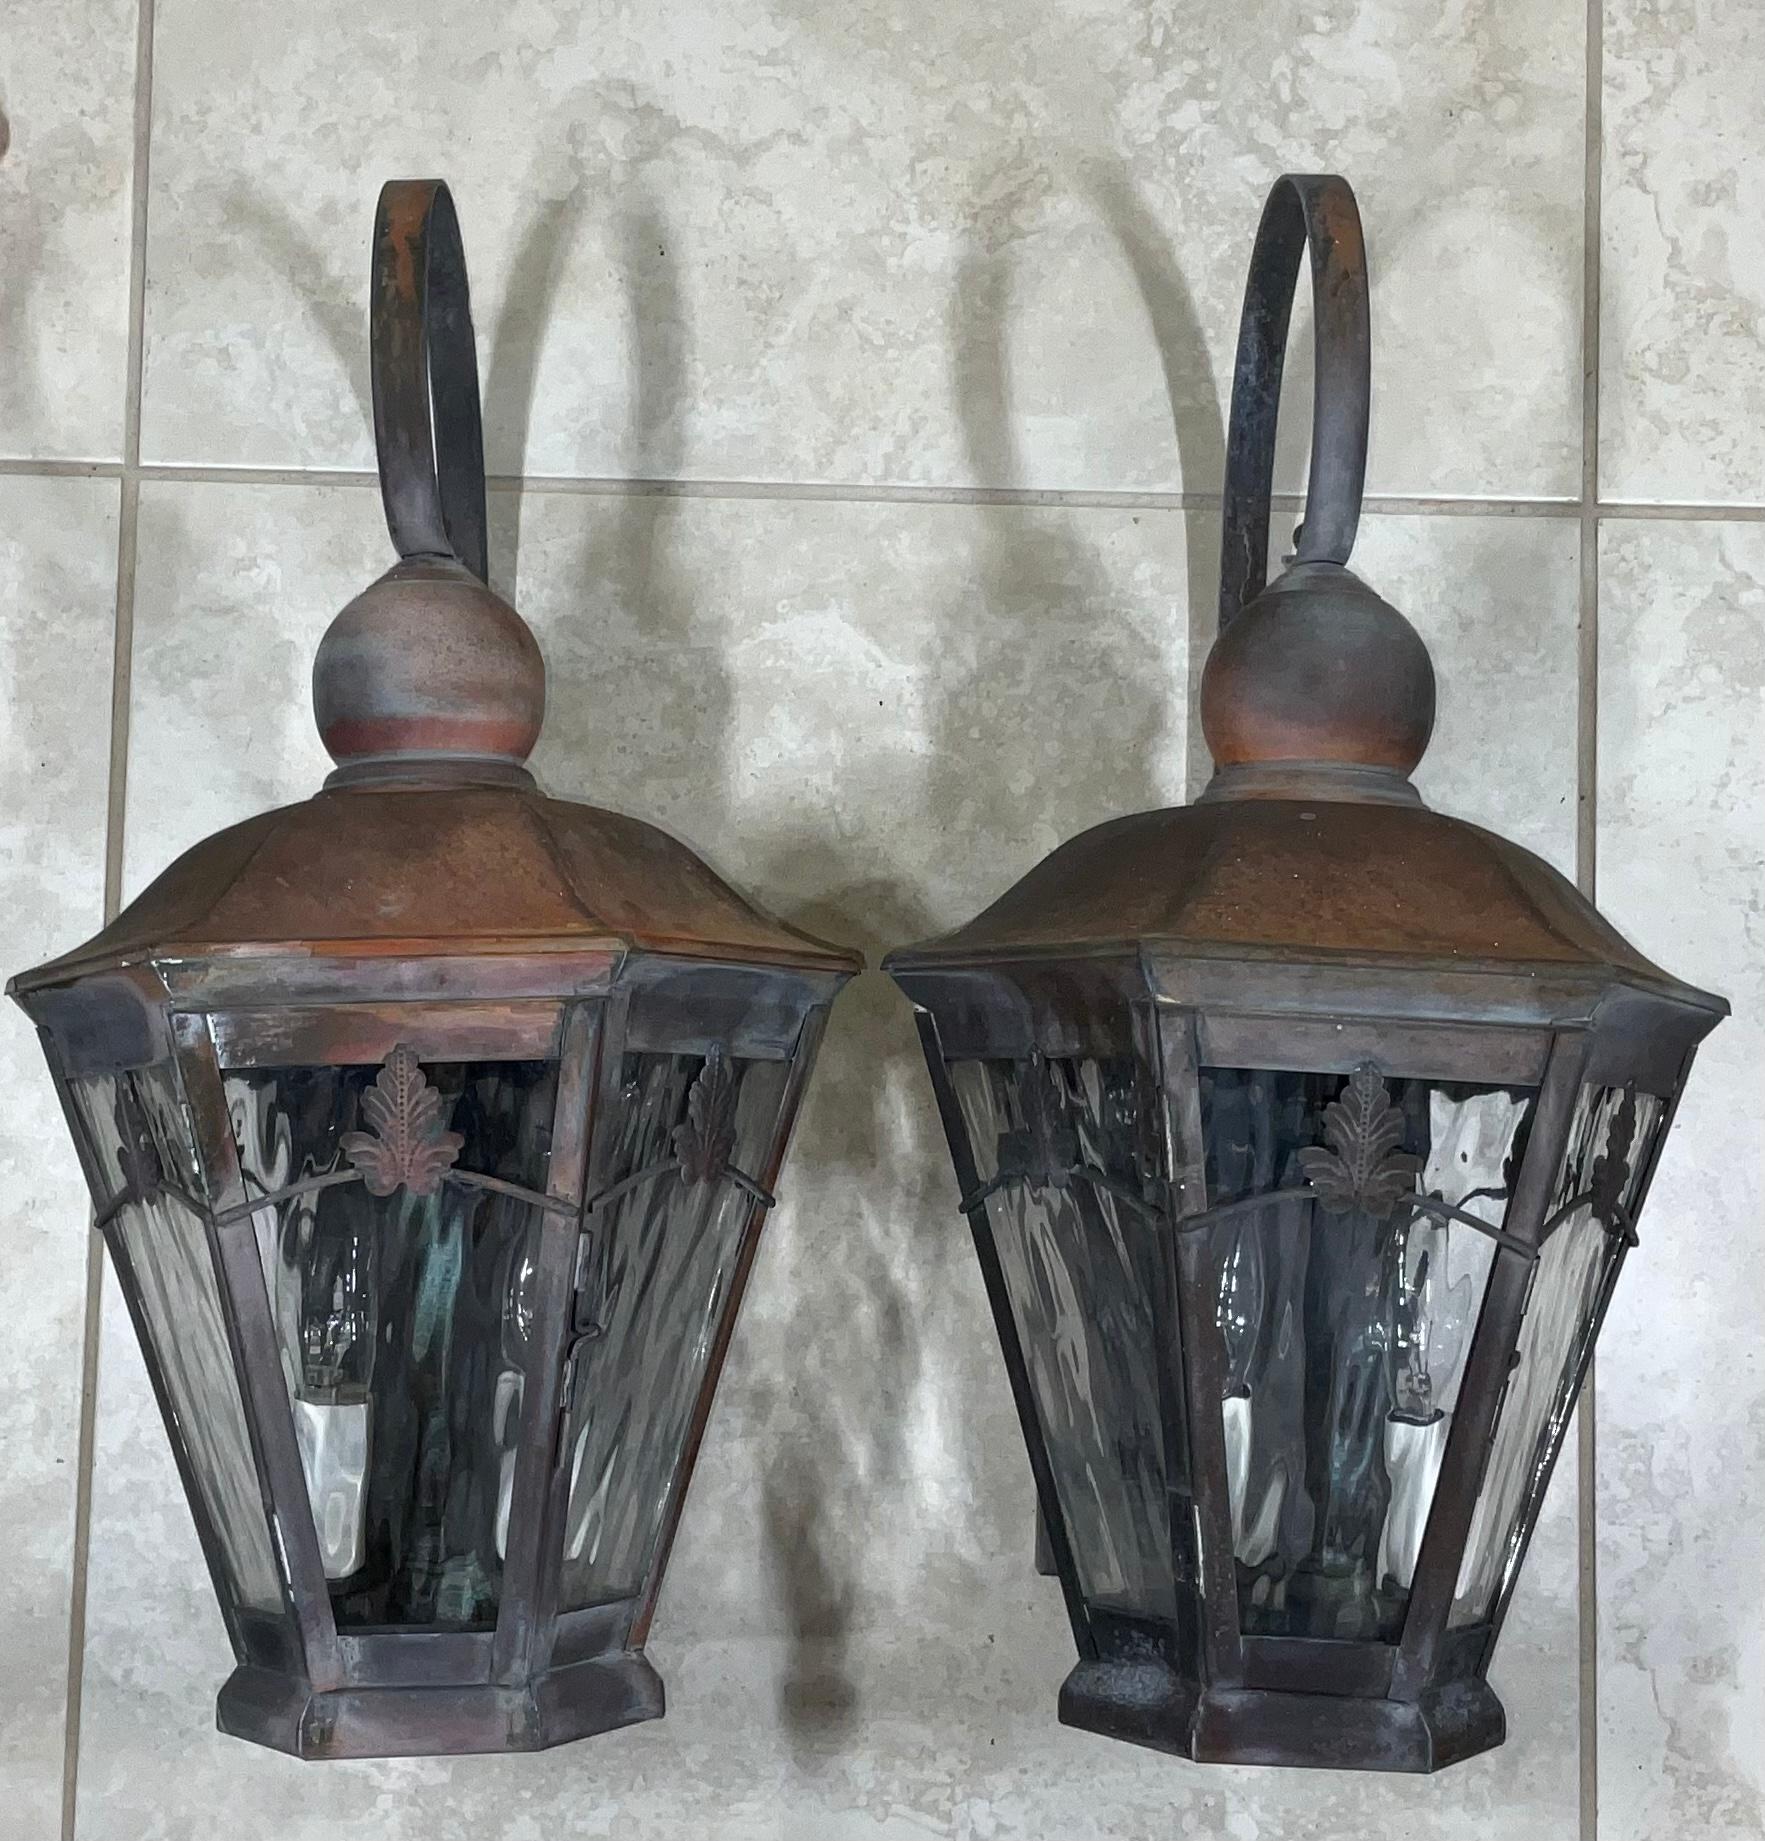 Elegant funky pair of wall hanging lantern made of copper with beautiful patina, electrified with two 60/watt lights each, wavy art glass .UL approved up to US code, suitable for wet locations, great for house entry,
Or even beautiful indoor.
 